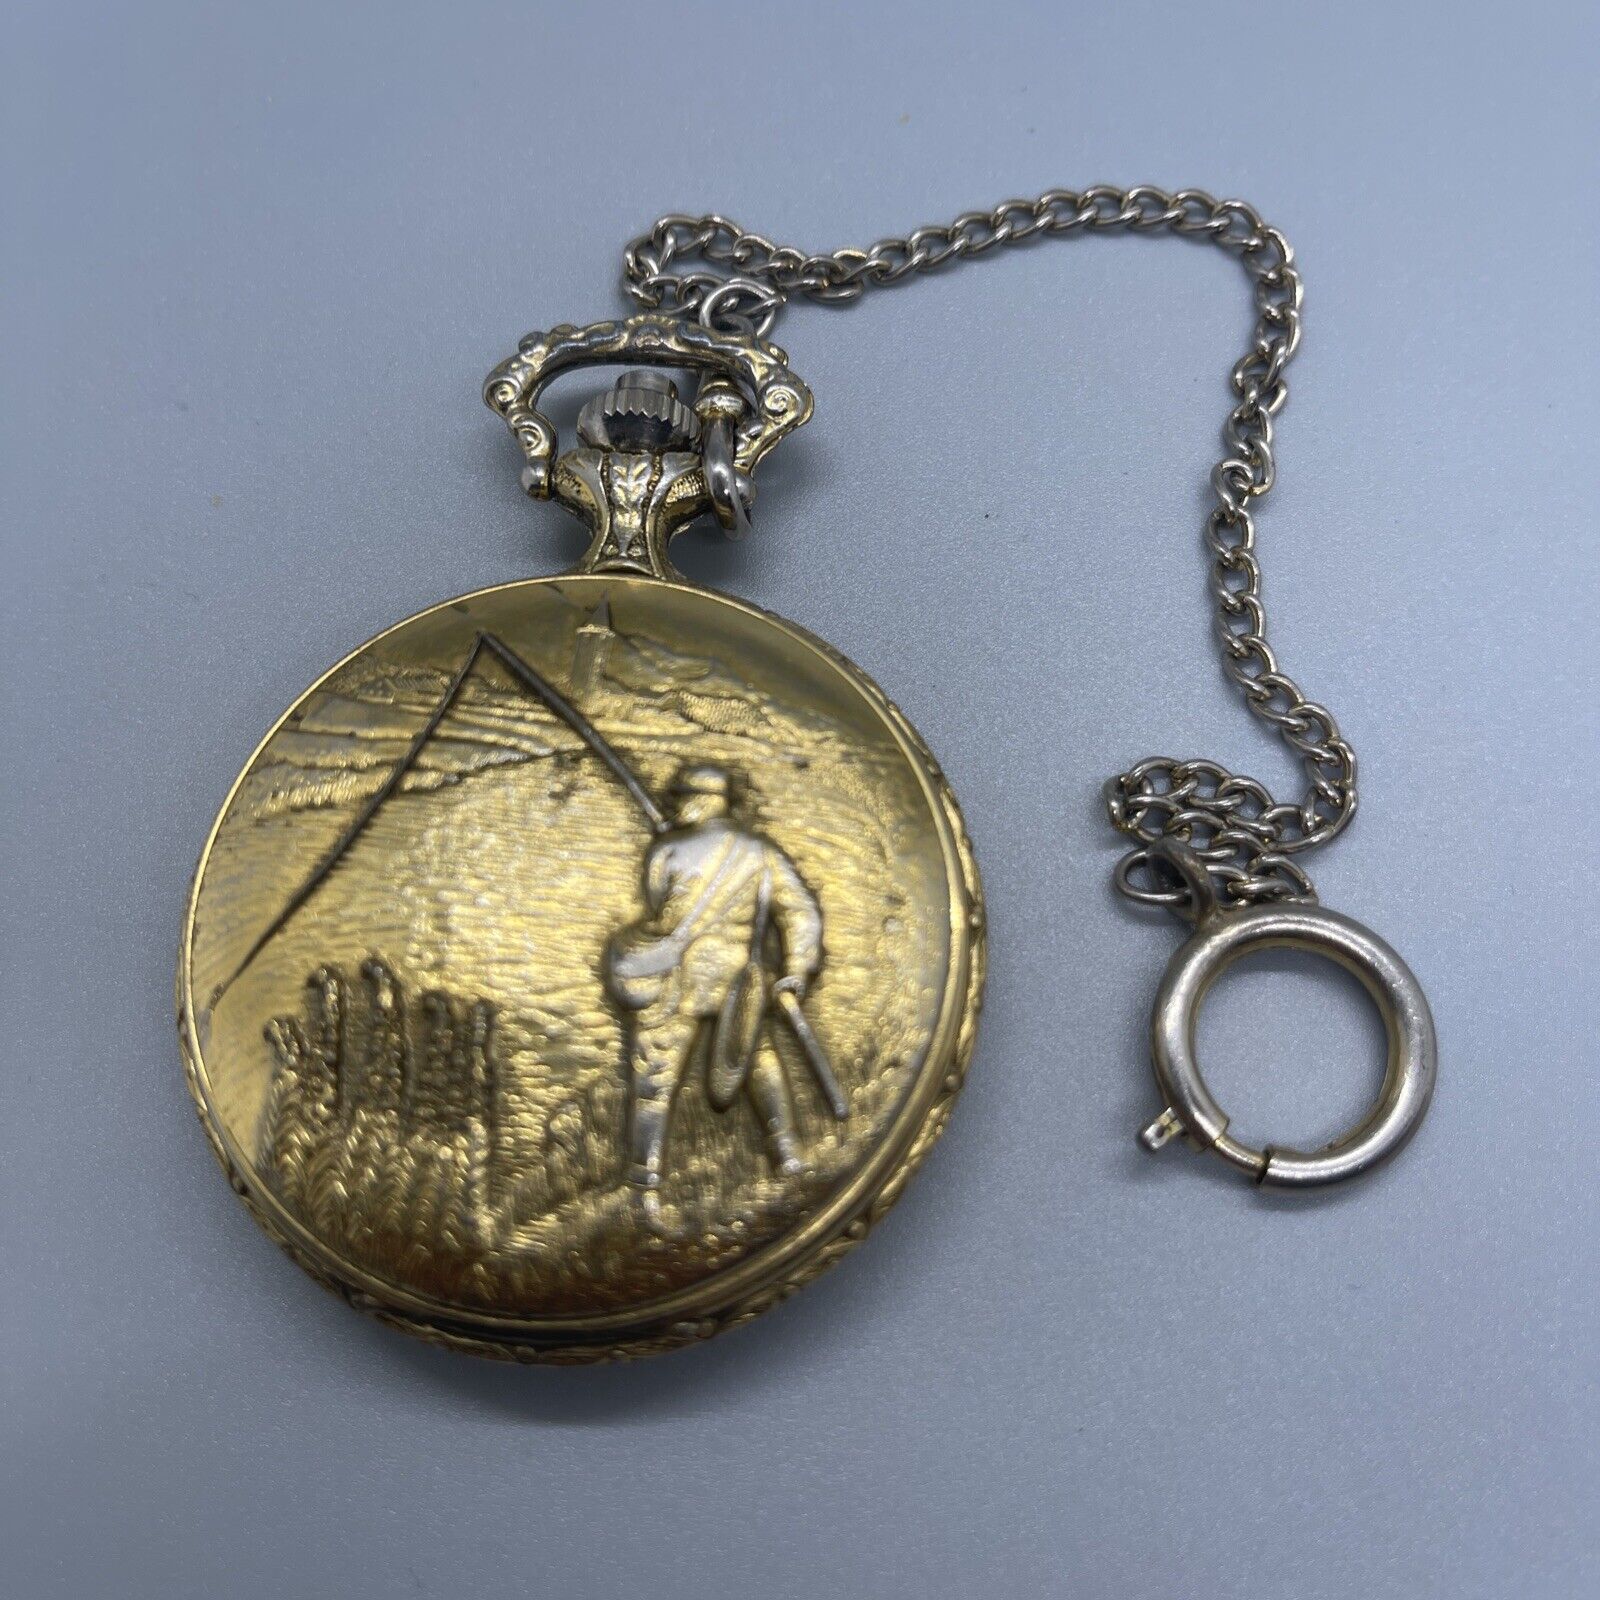 Jean Cardot Pocket Watch Fishing Needs Batteries Gold Tone With Chain